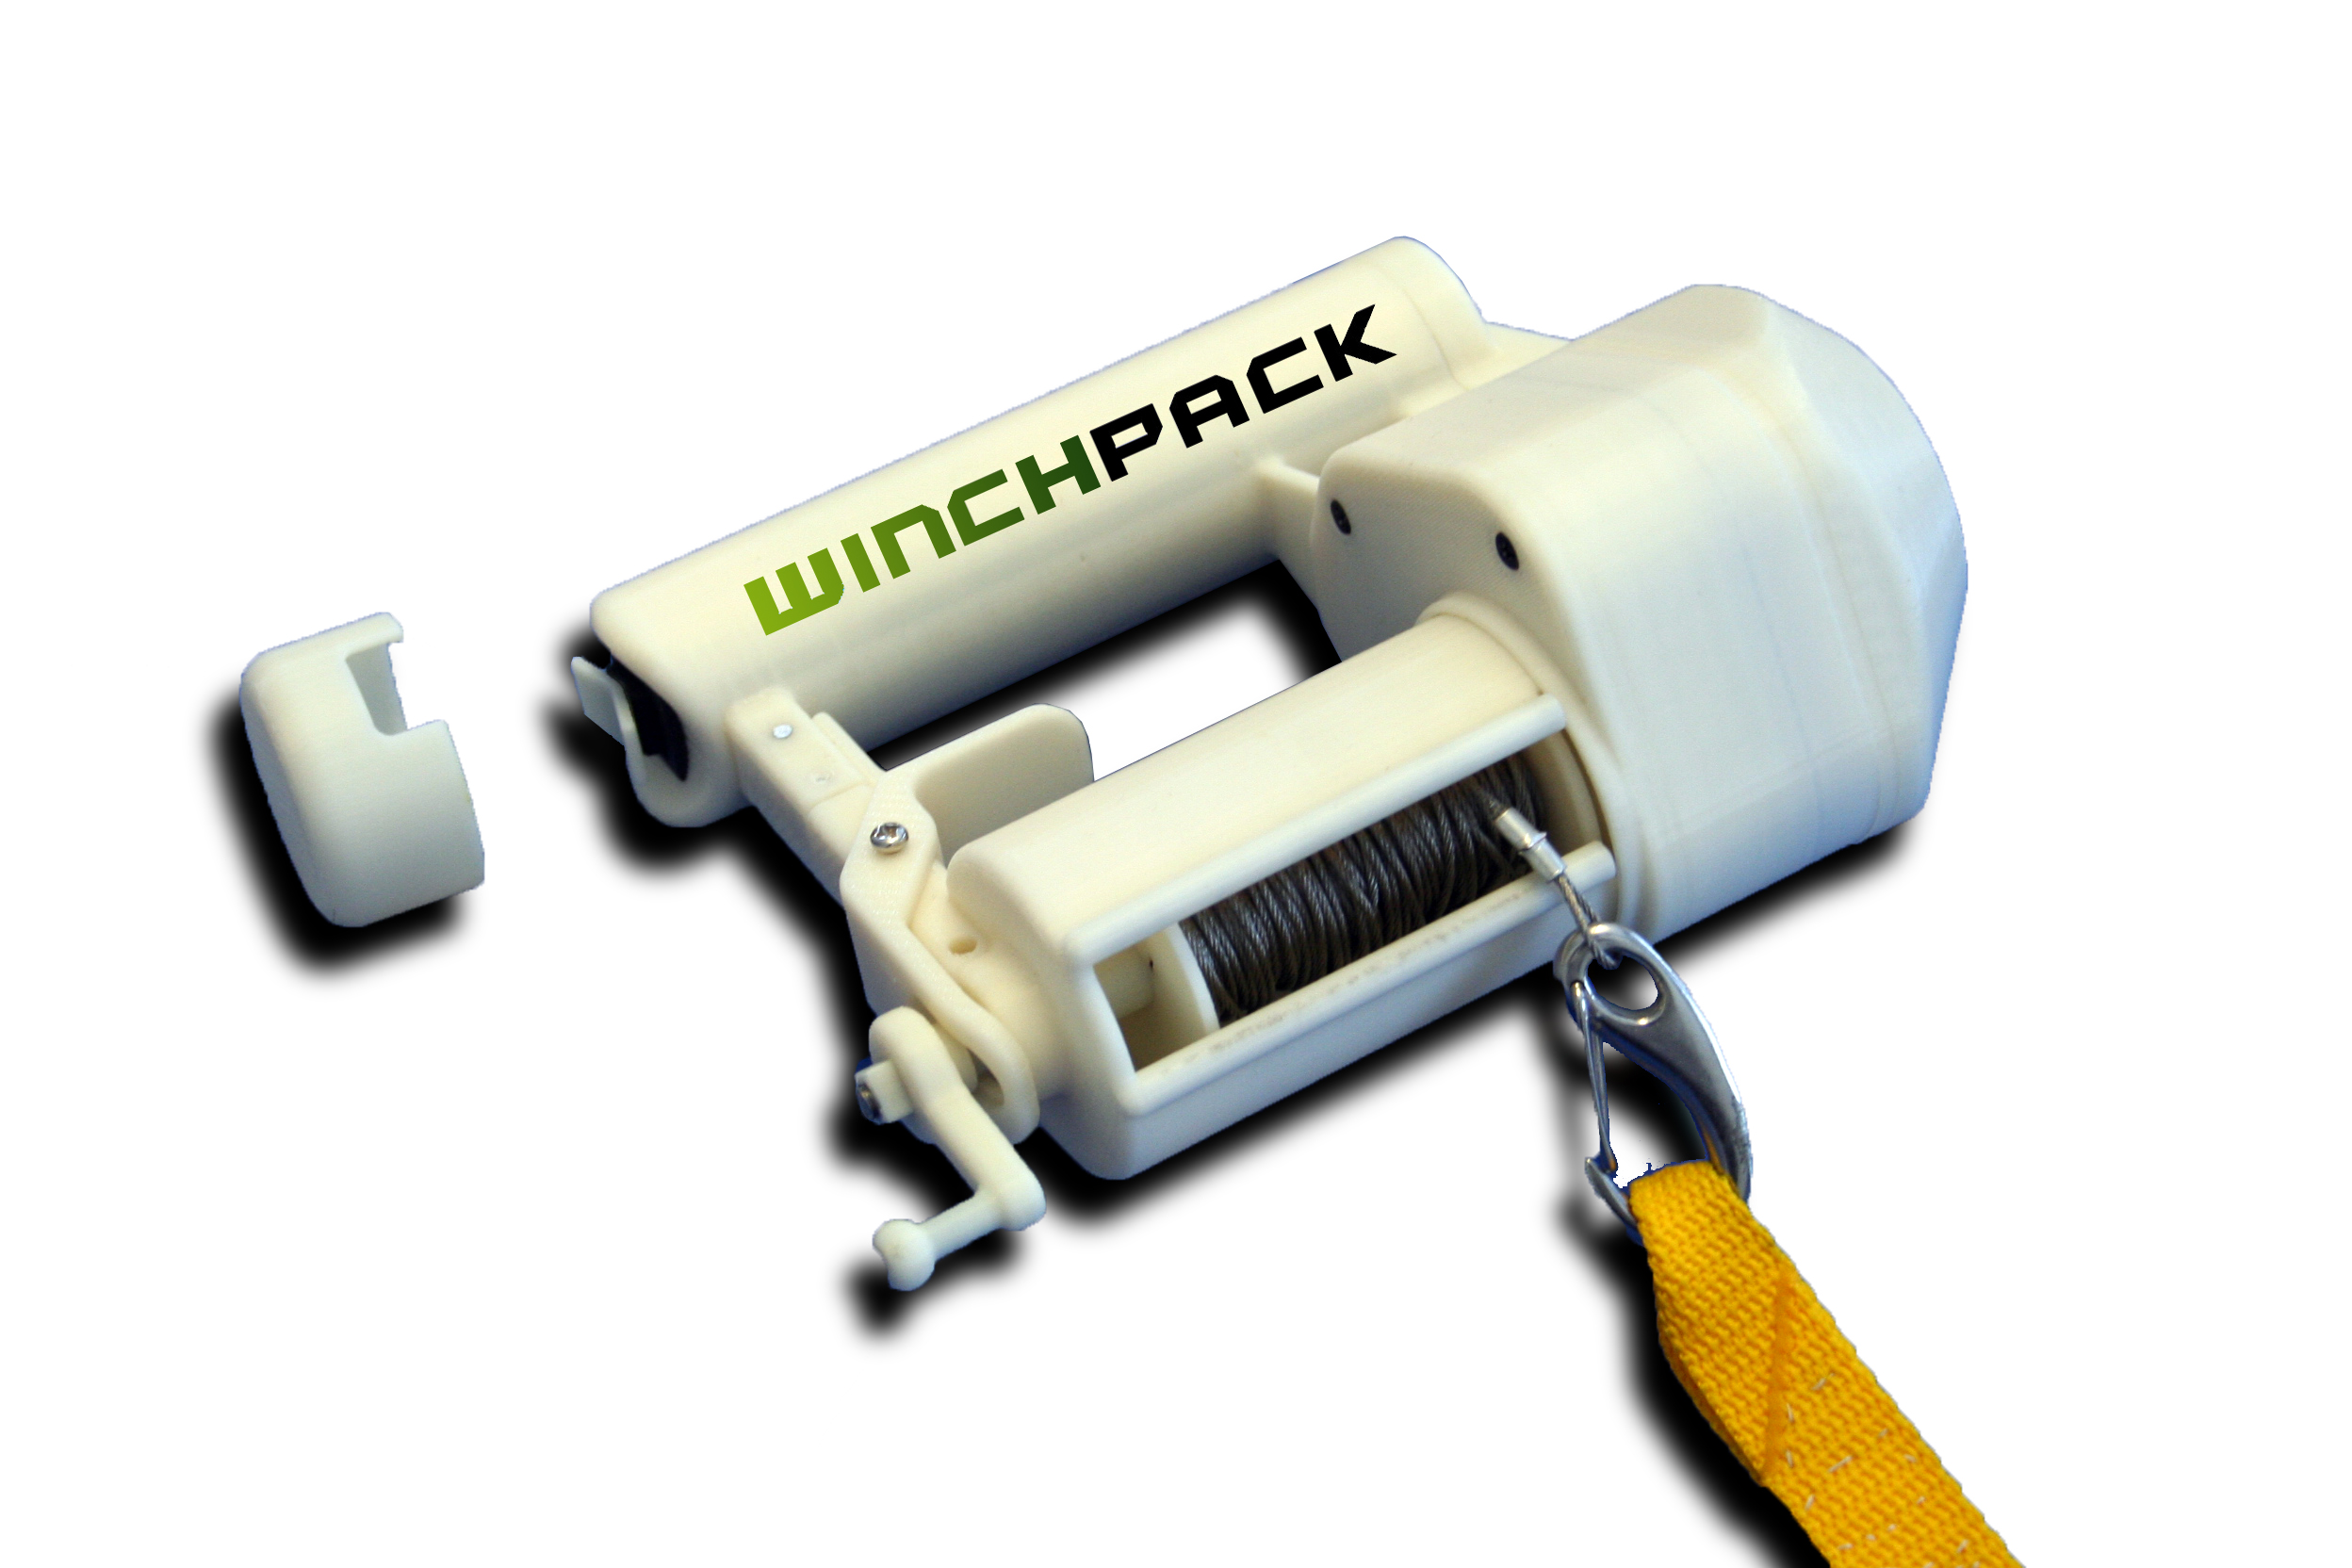 Winchpack with logo